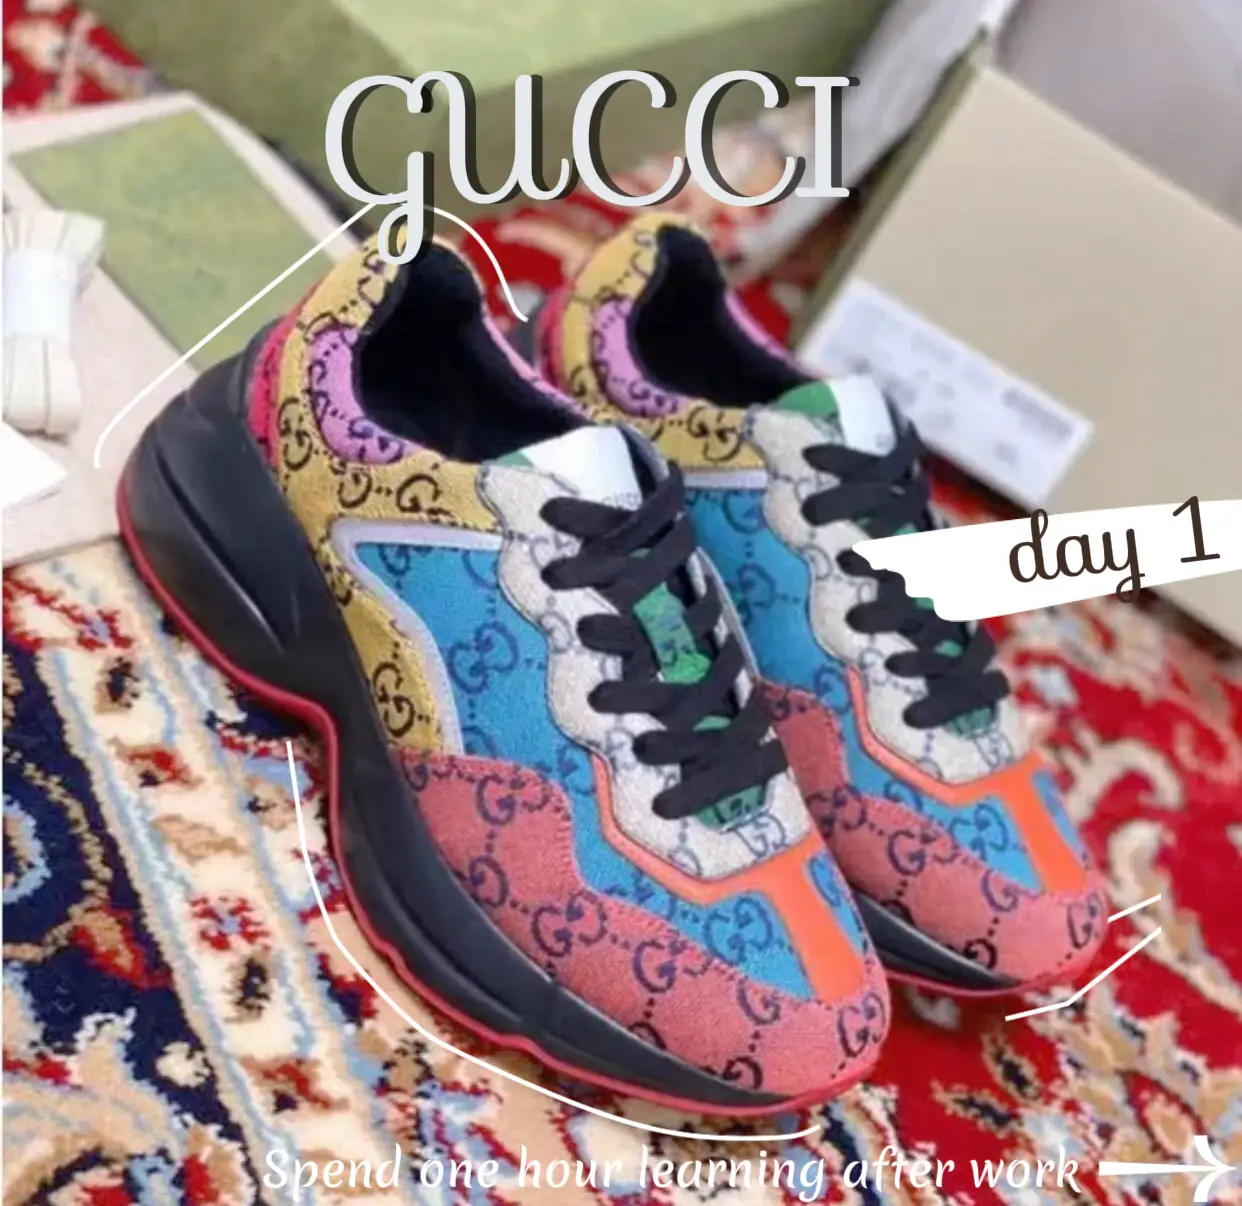 gucci sneakers outfit - Lemon8 Search